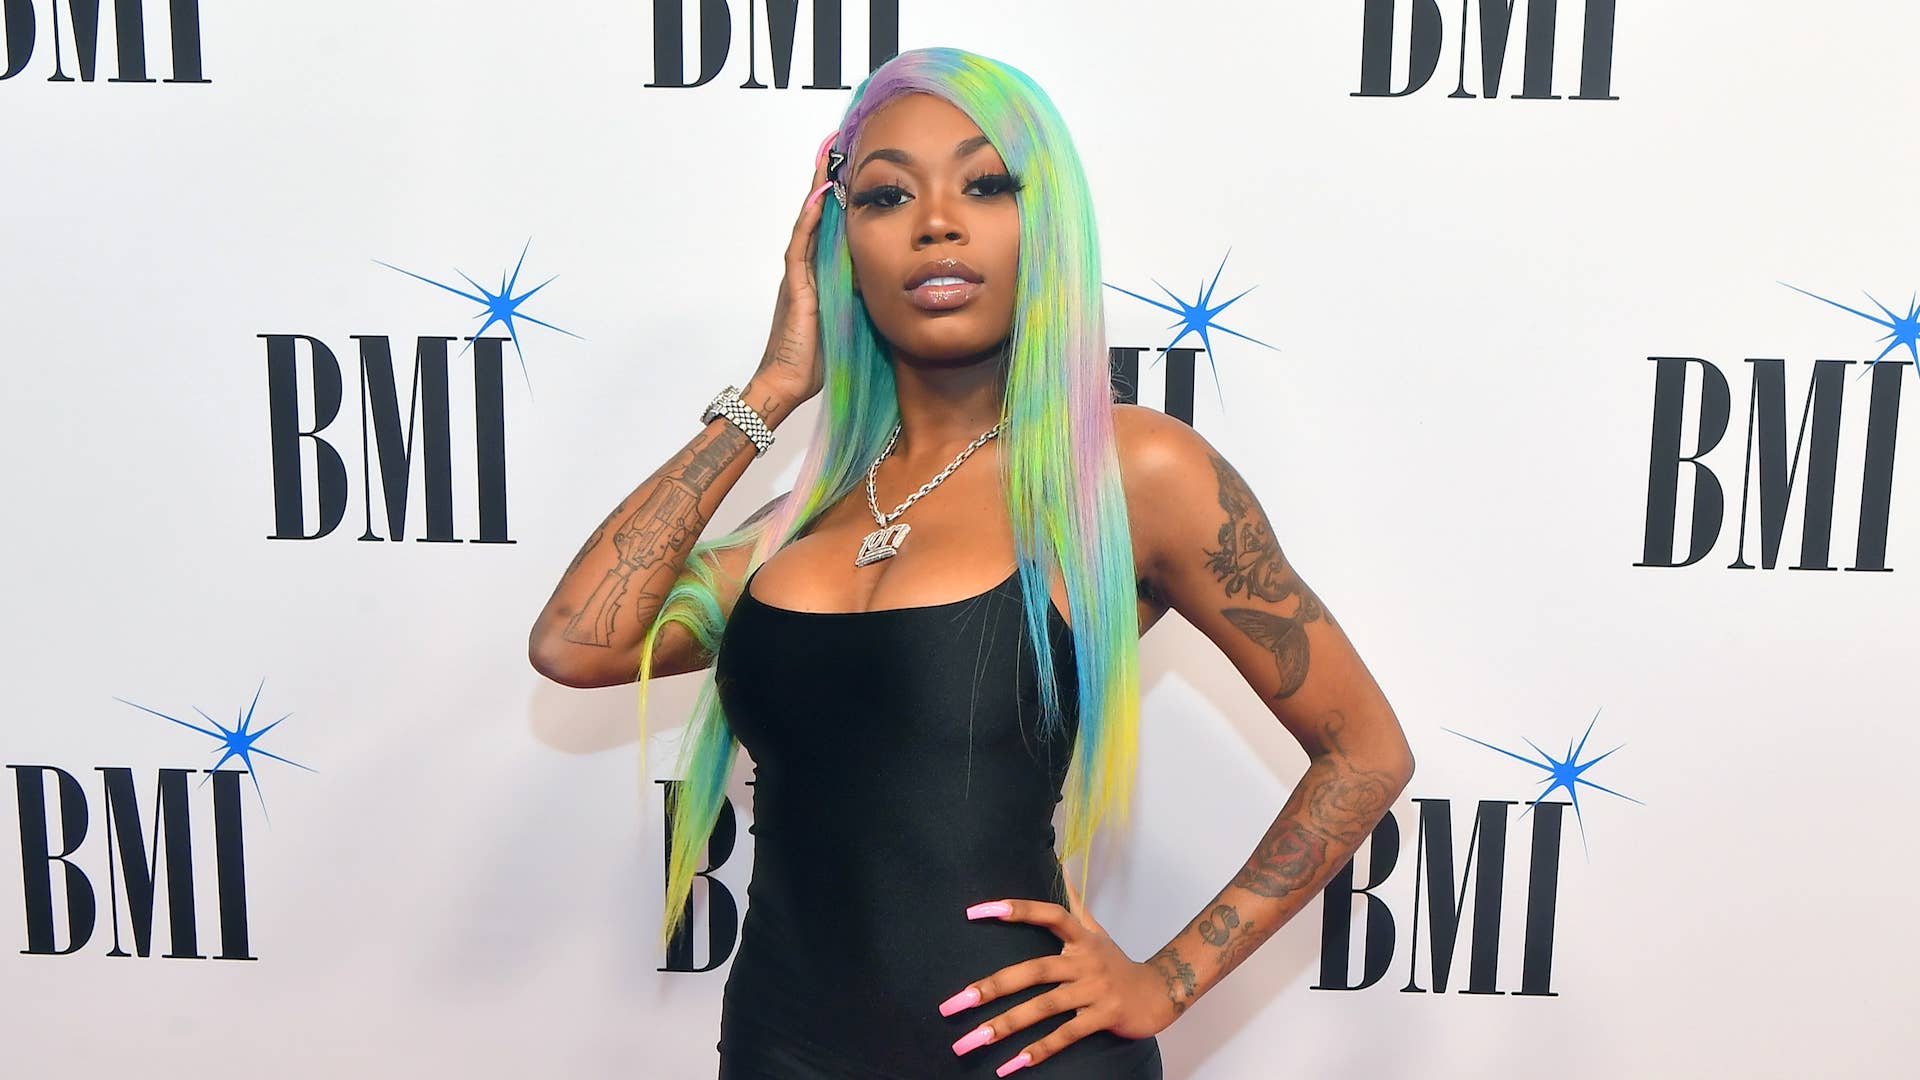 Asian Doll attends The 2019 BMI R&B/Hip Hop Awards